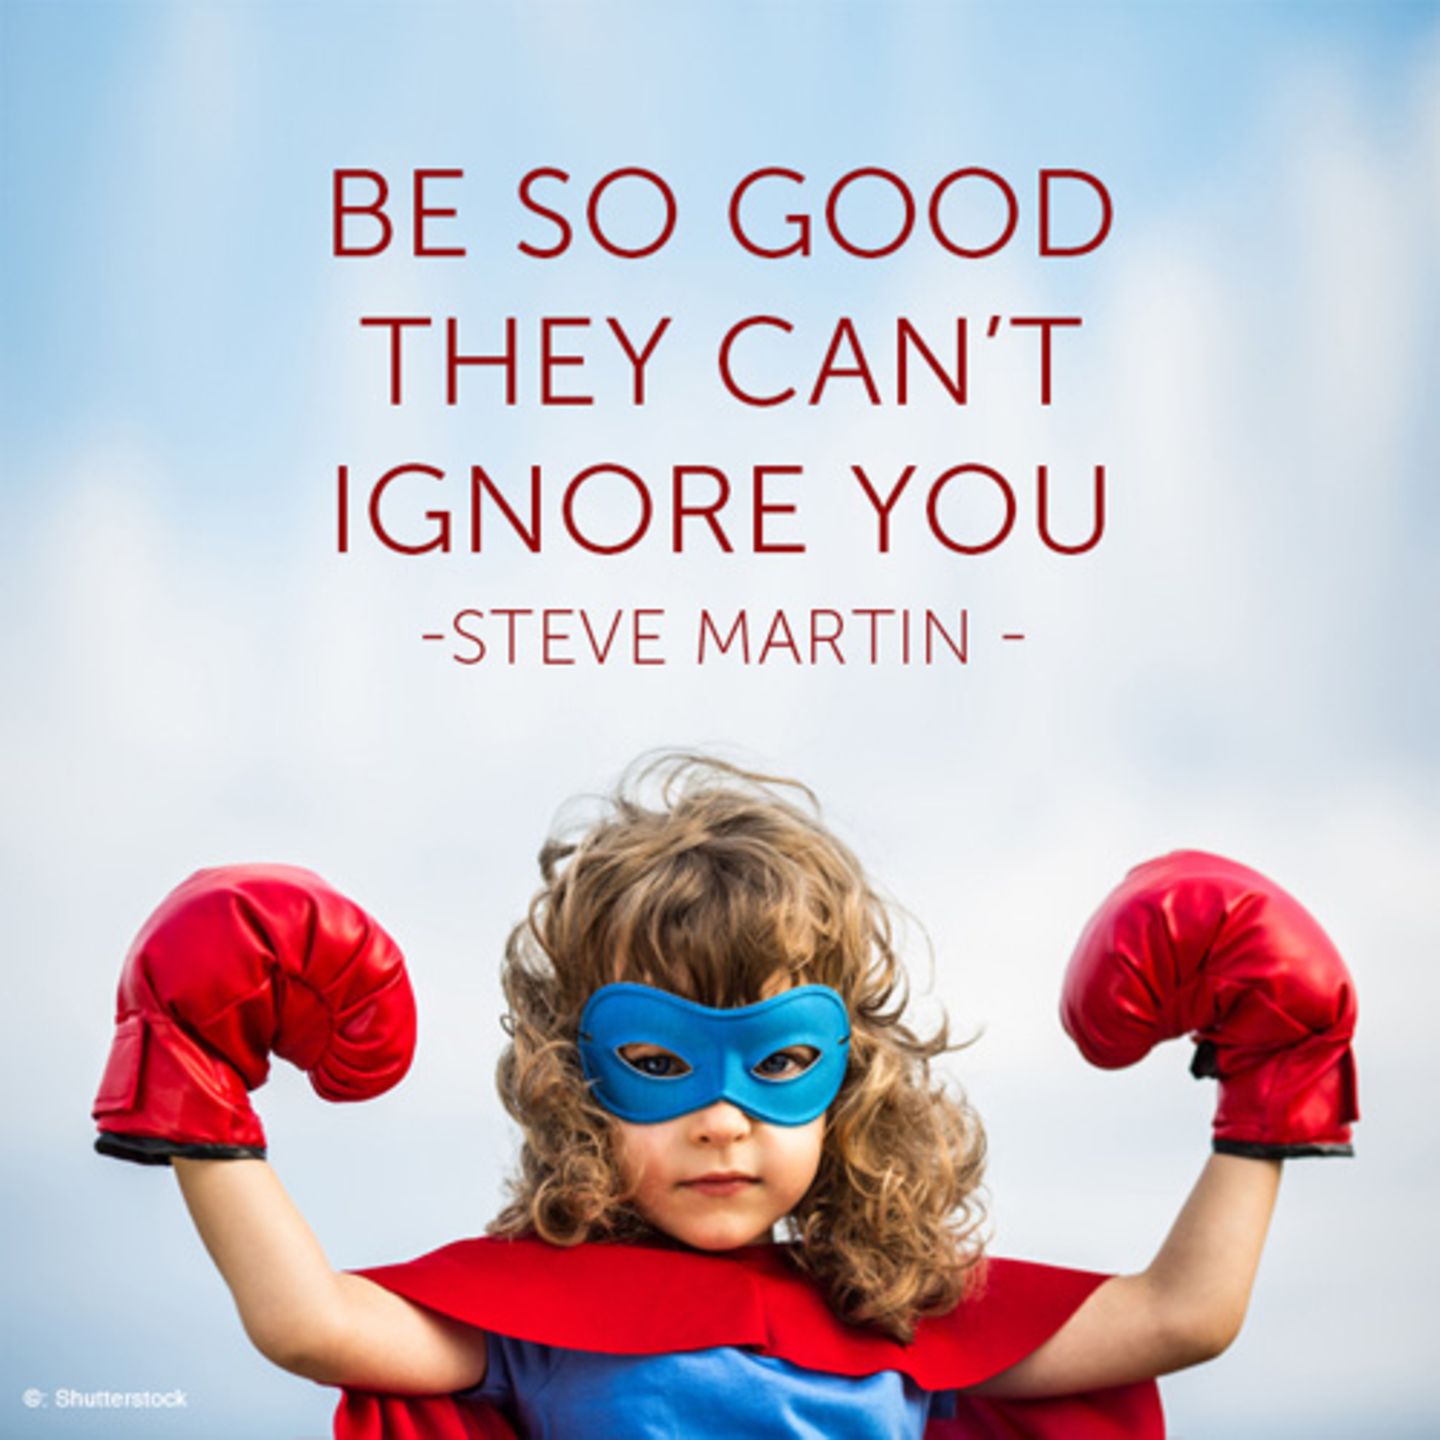 Be so good, they can't ignore you.